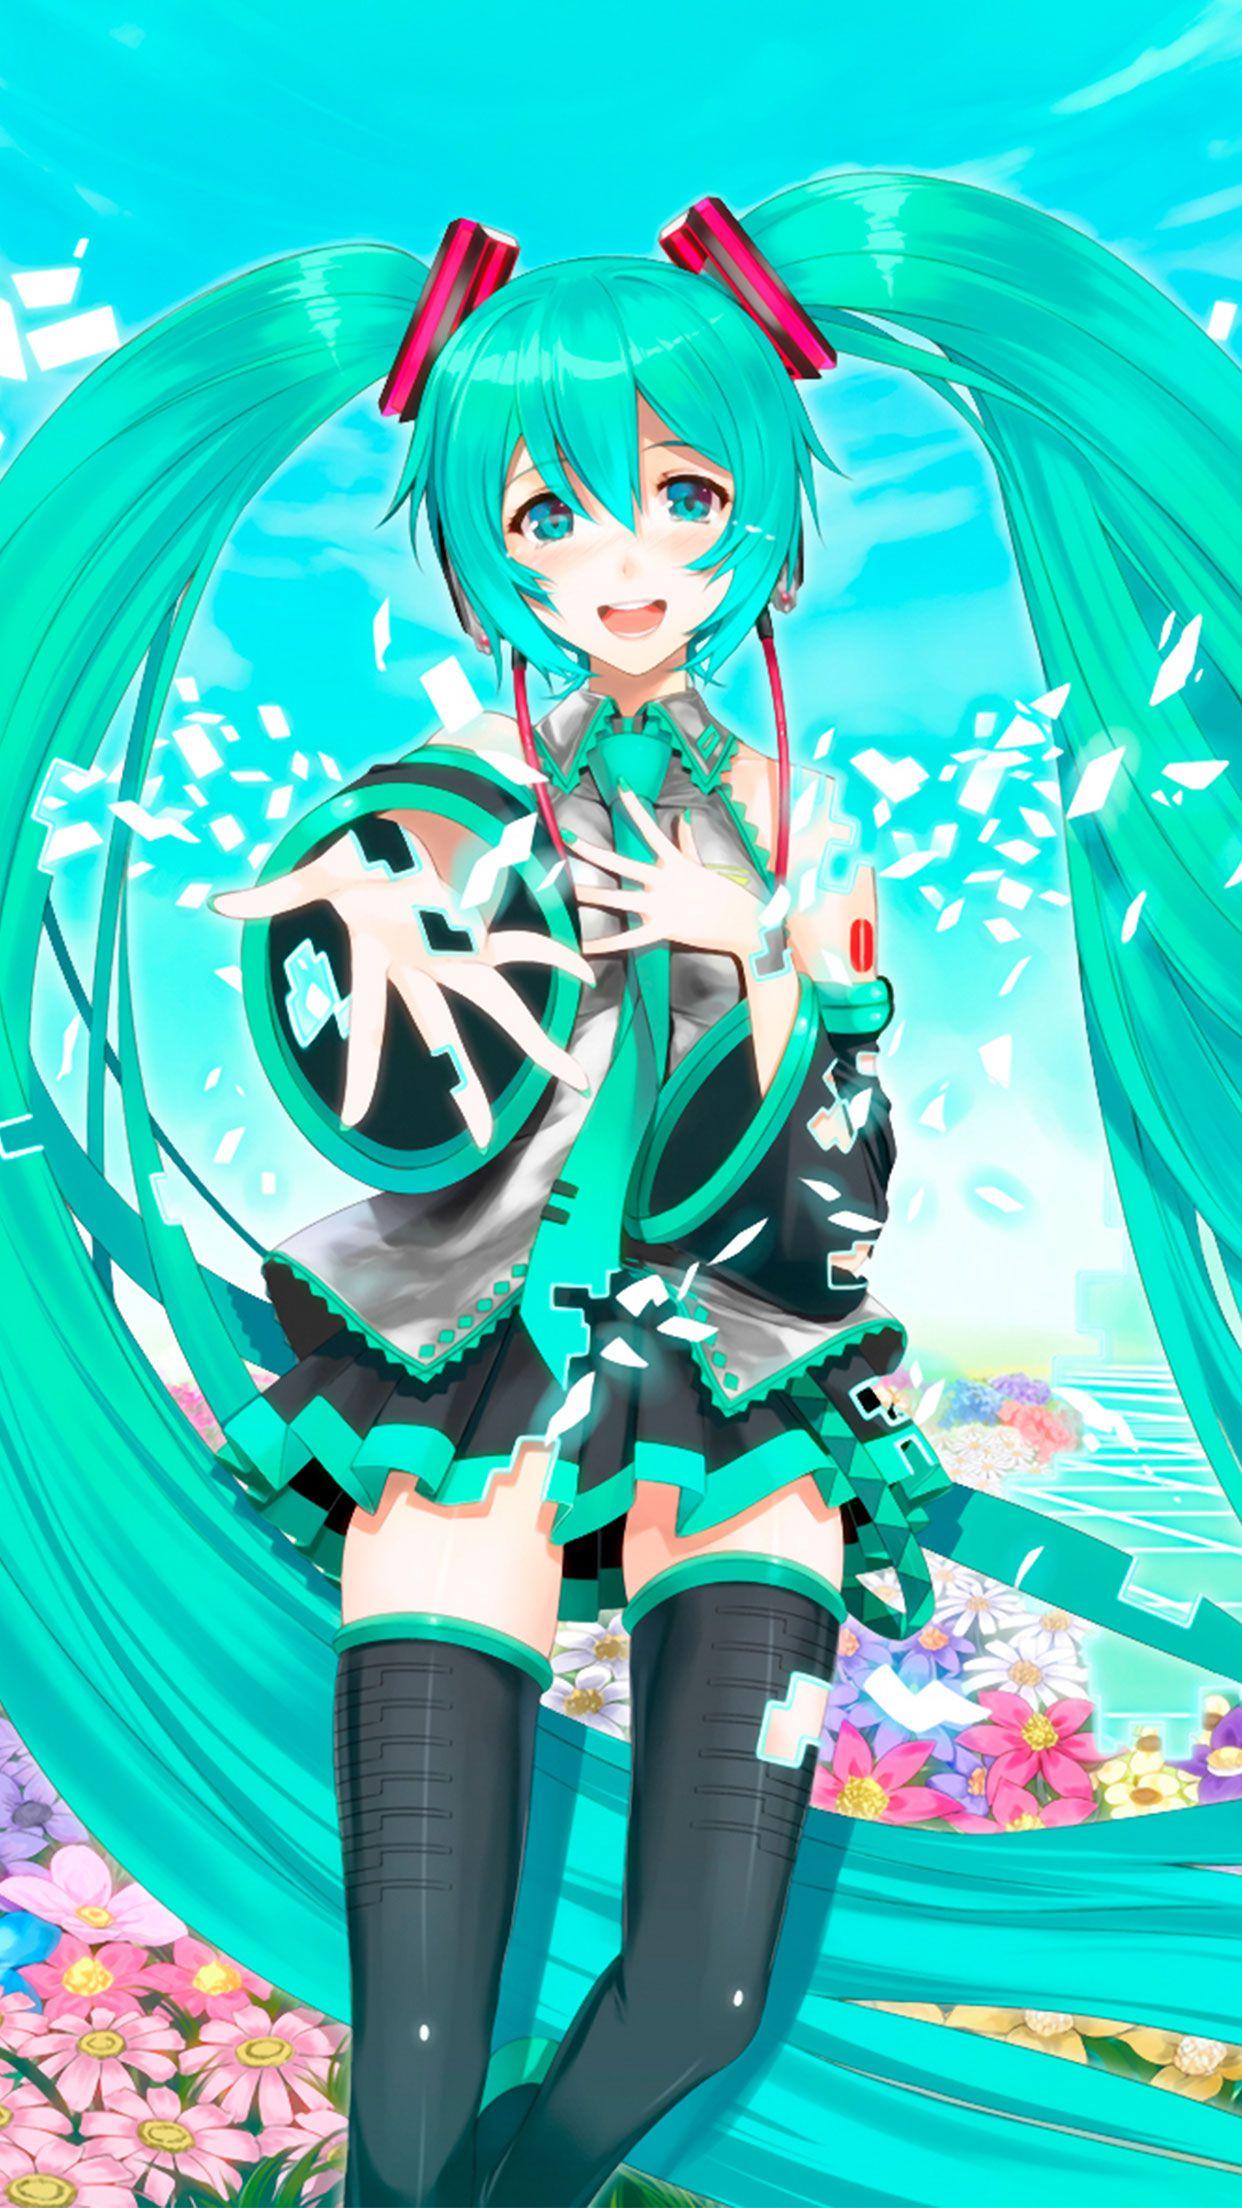 Hatsune Miku anime wallpaper for #iPhone and #Android #hatsune #miku #anime #wallpaper check out more on wallzapp.com